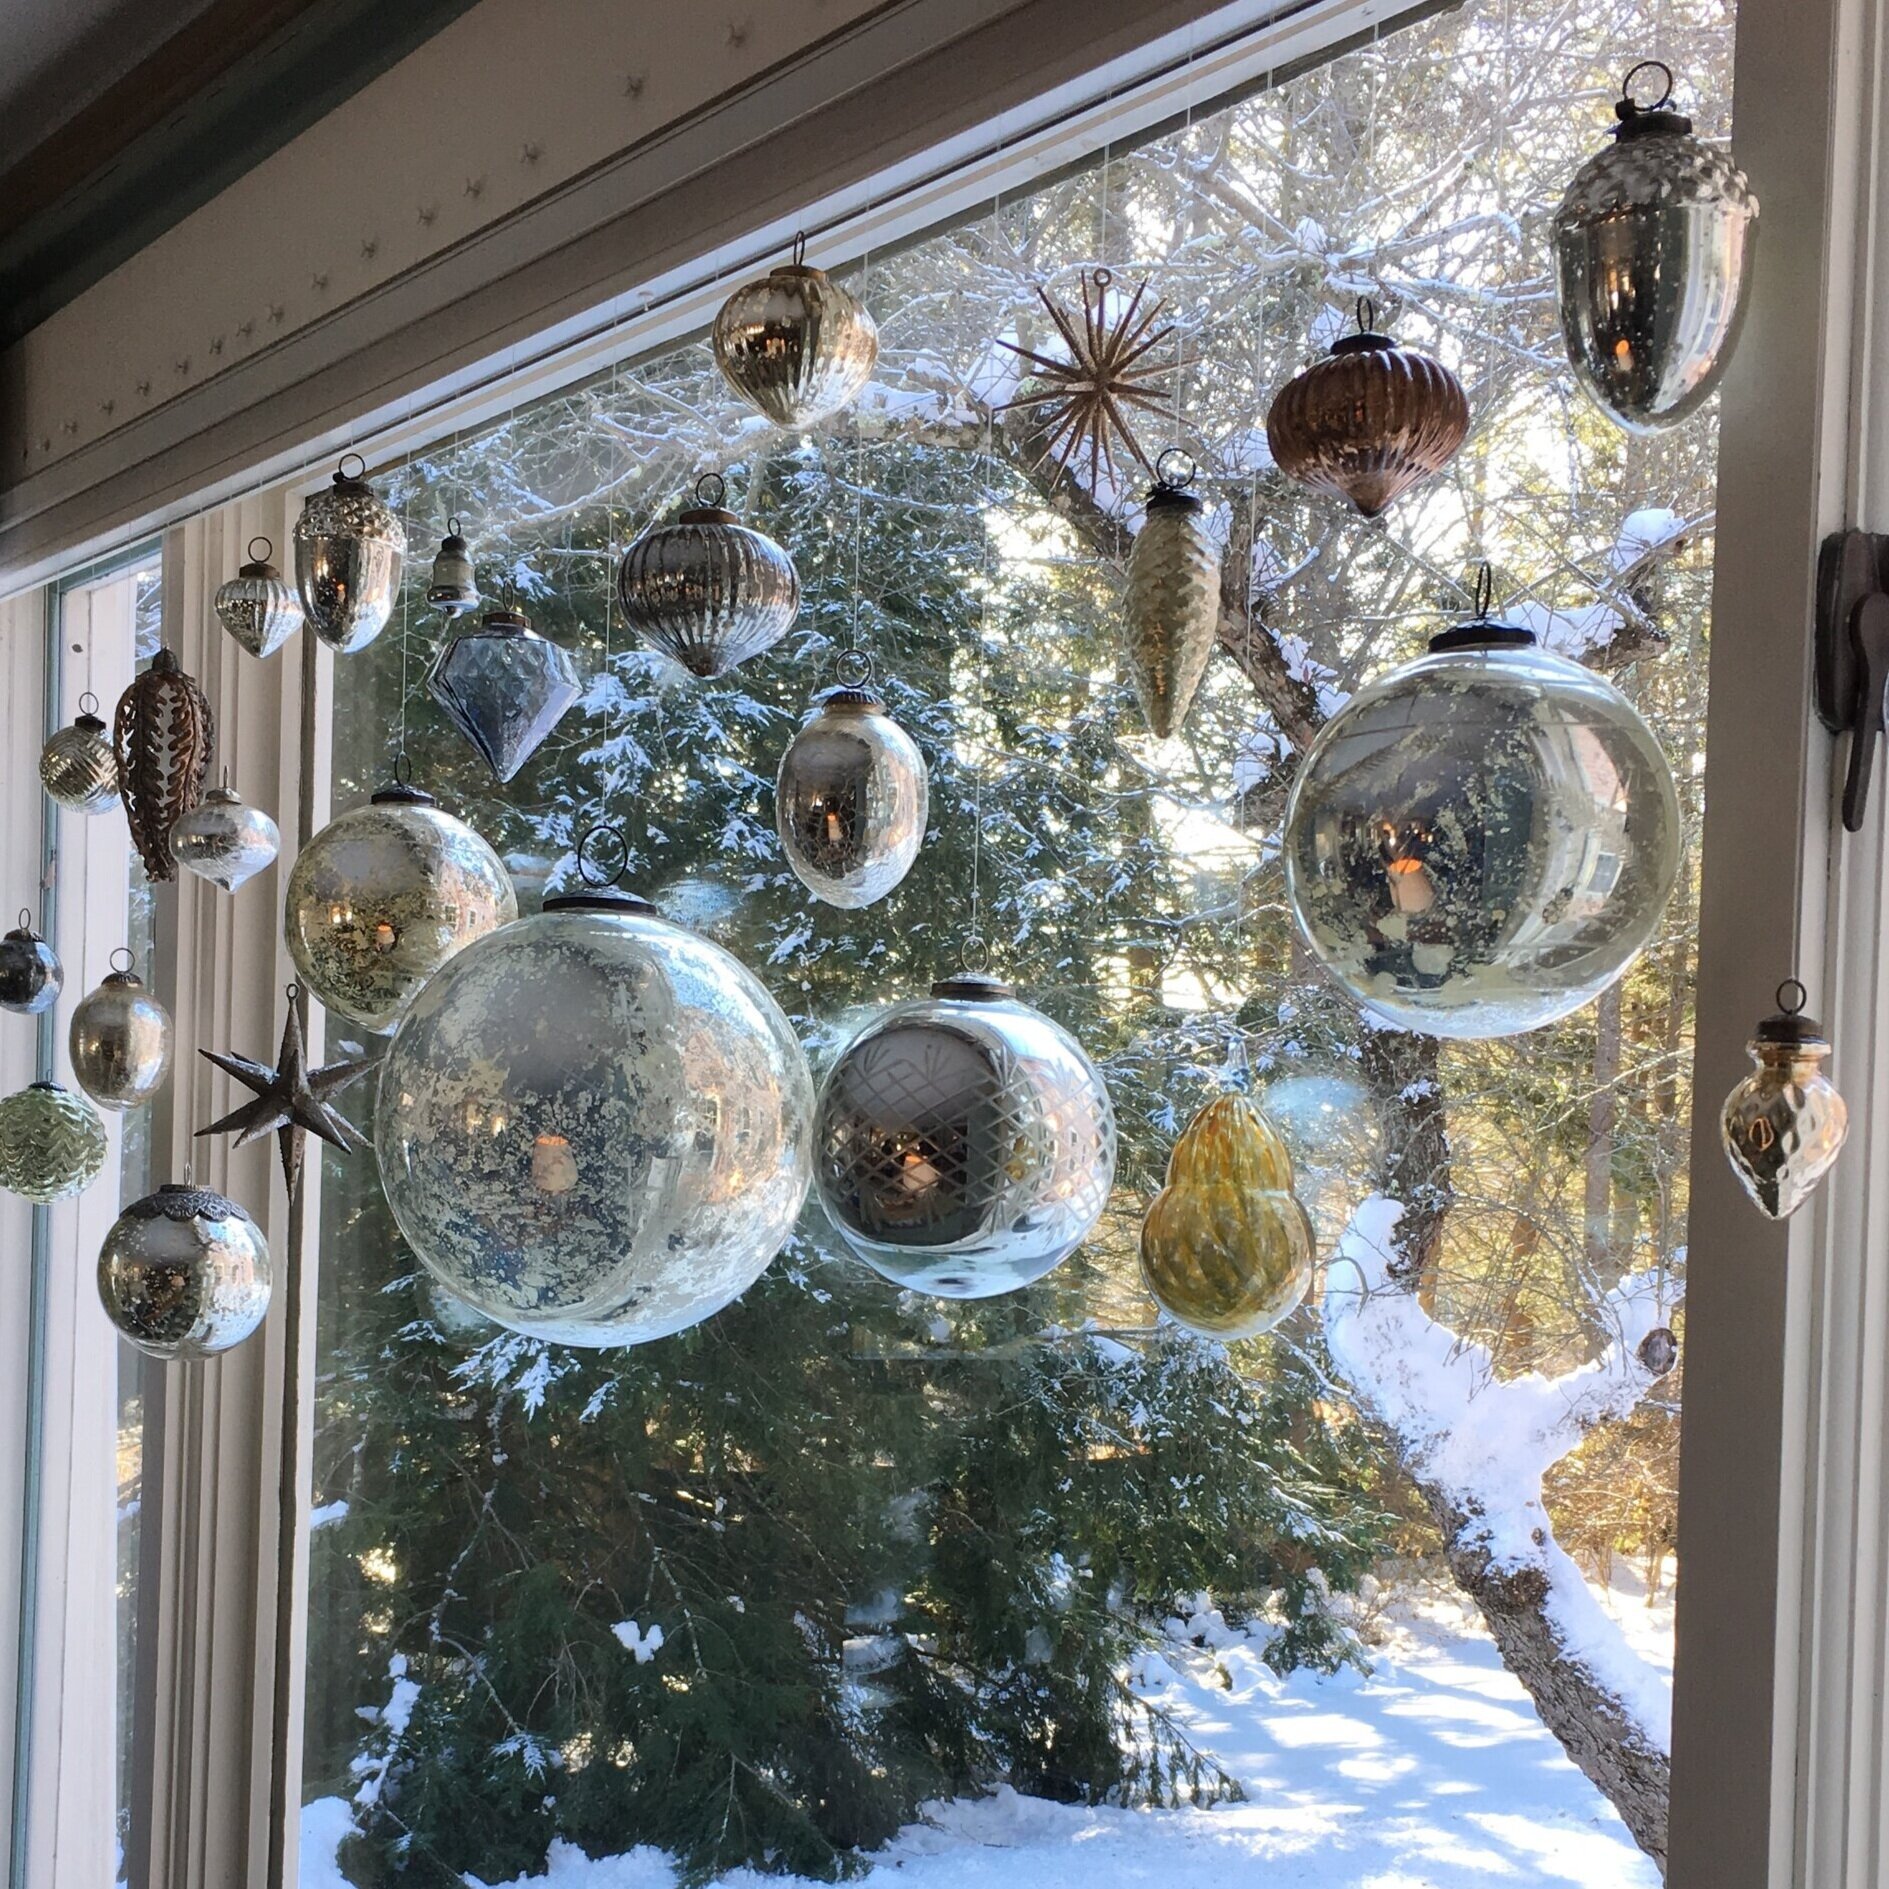 Blown+and+mercury+glass+ornaments+decorate+a+picture+window.jpg